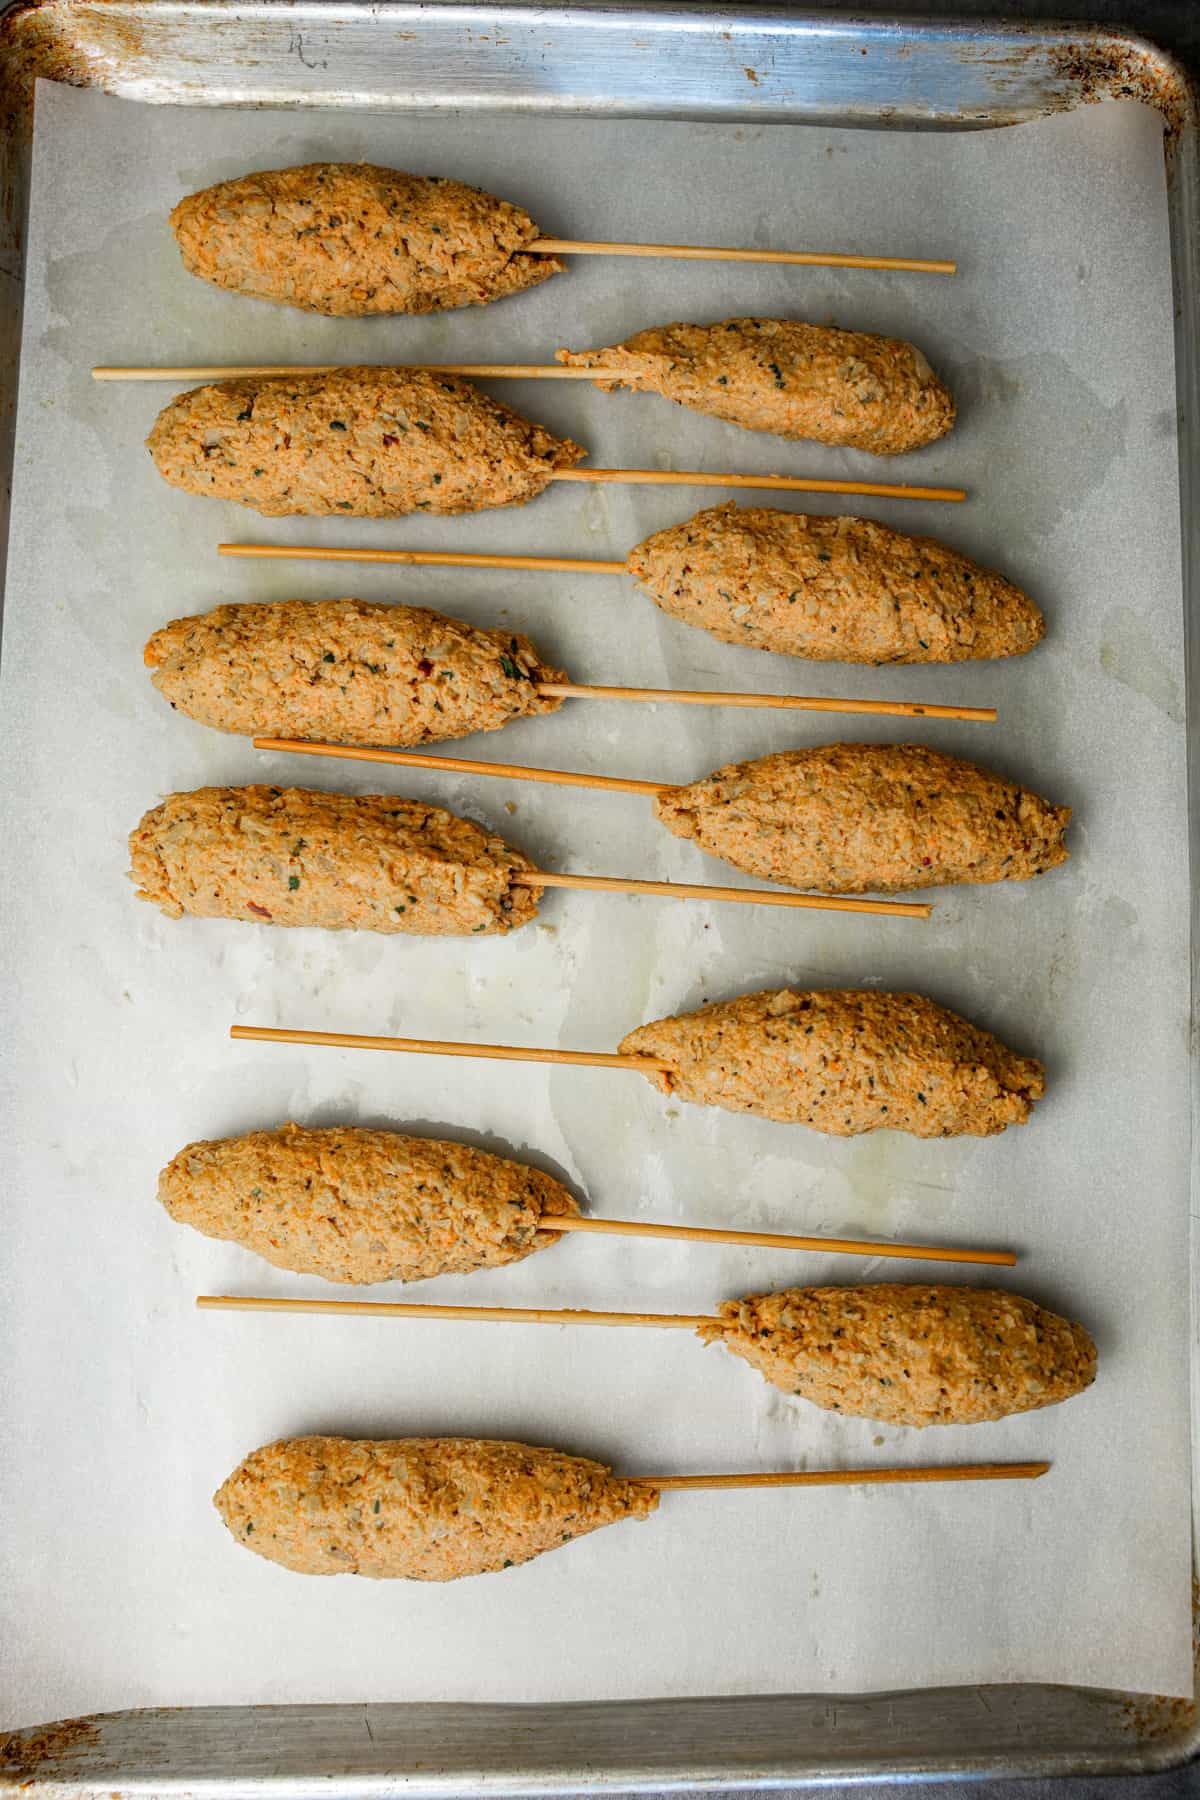 vegan kofta is formed and skewered on a parchment paper-lined baking pan.